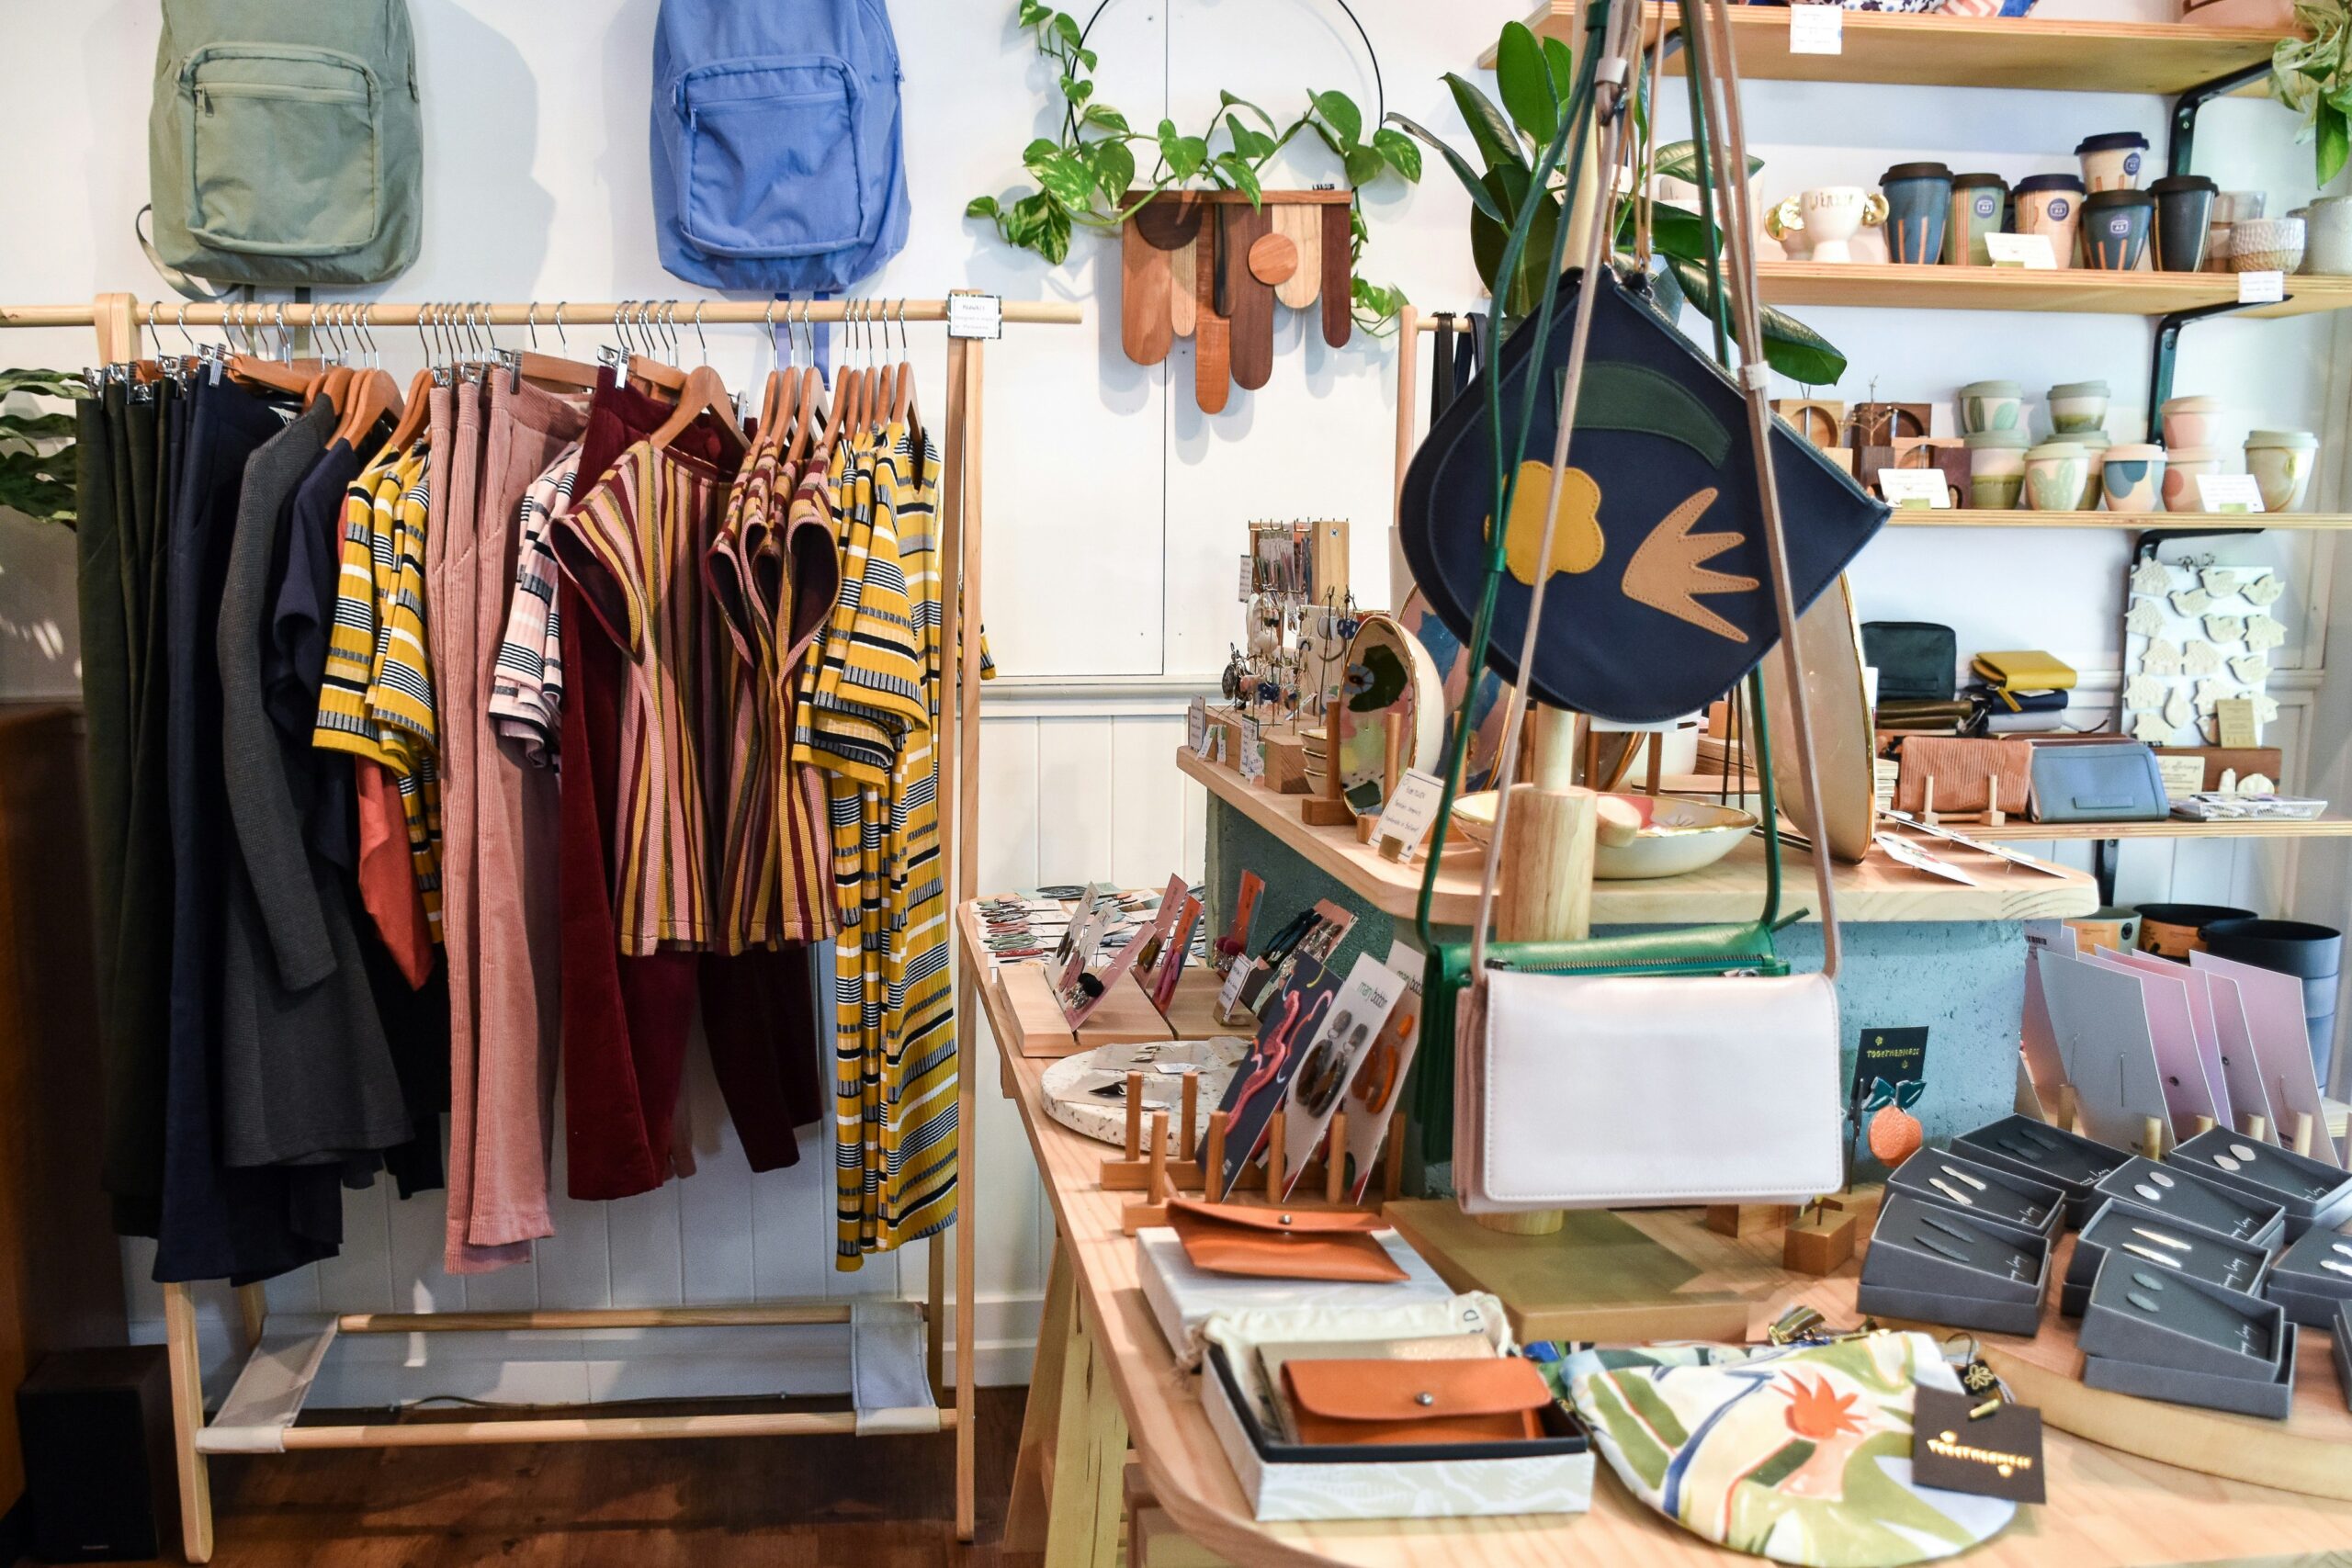 From Vintage to Modern: The Eclectic Range of Boutique in Charleston